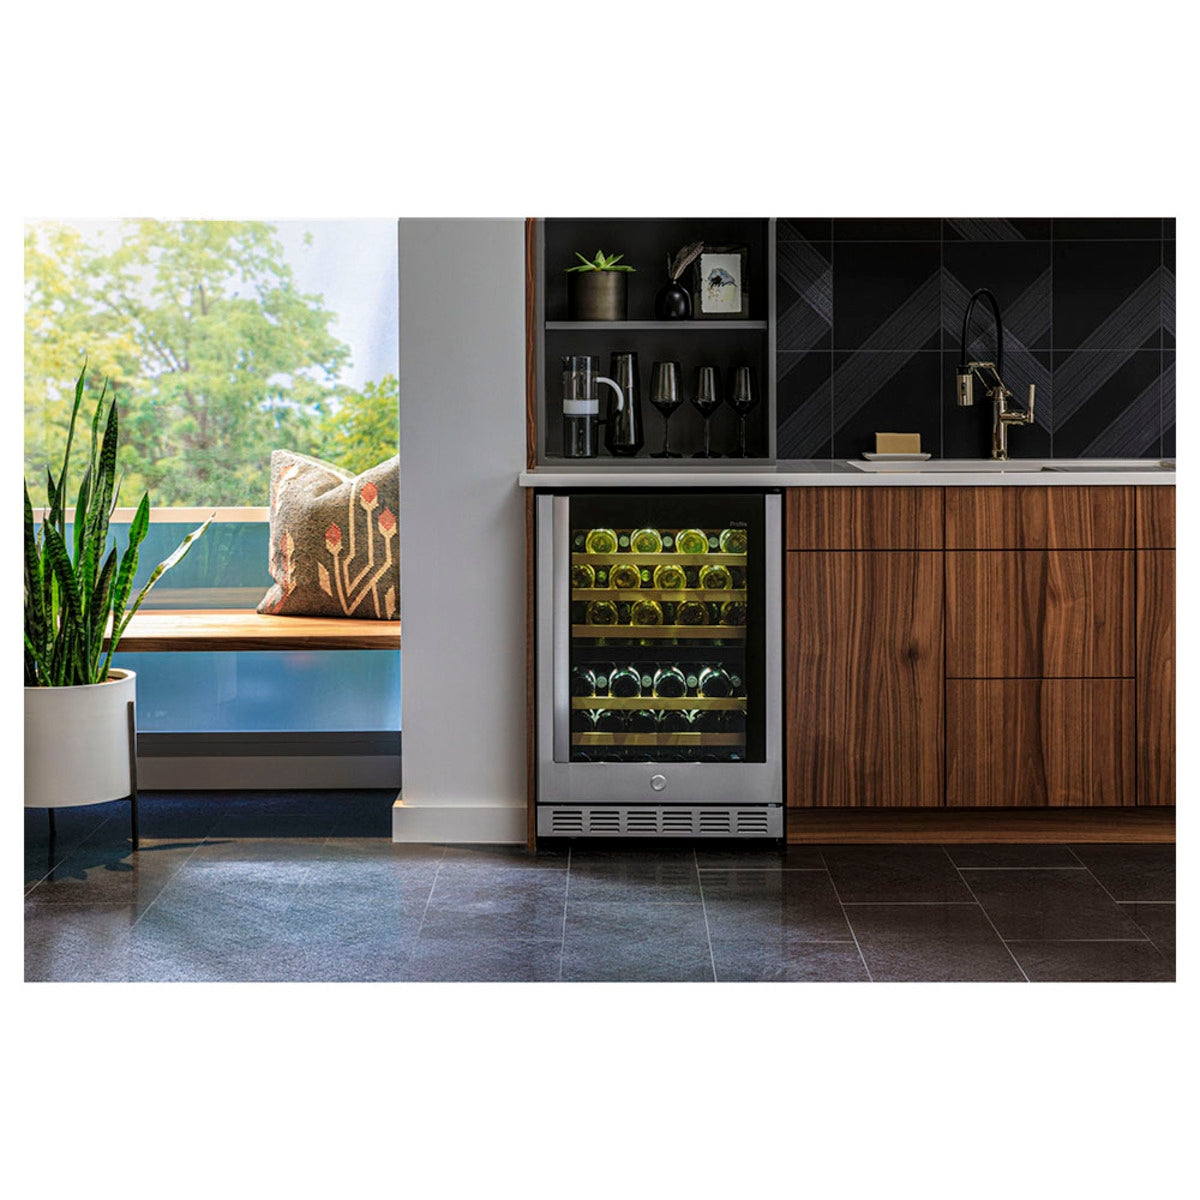 GE Profile - 23.5 Inch 4.8 cu. ft Wine Fridge Refrigerator in Stainless - PWS06DSPSS